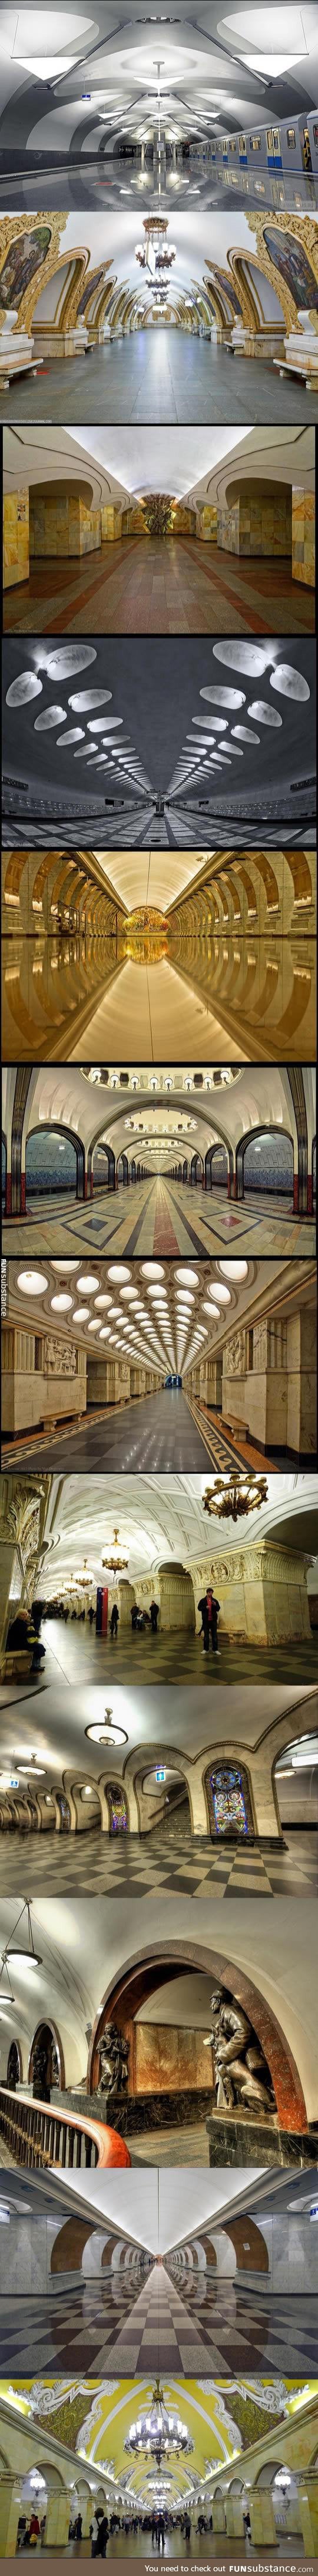 Moscow metro stations are magnificent